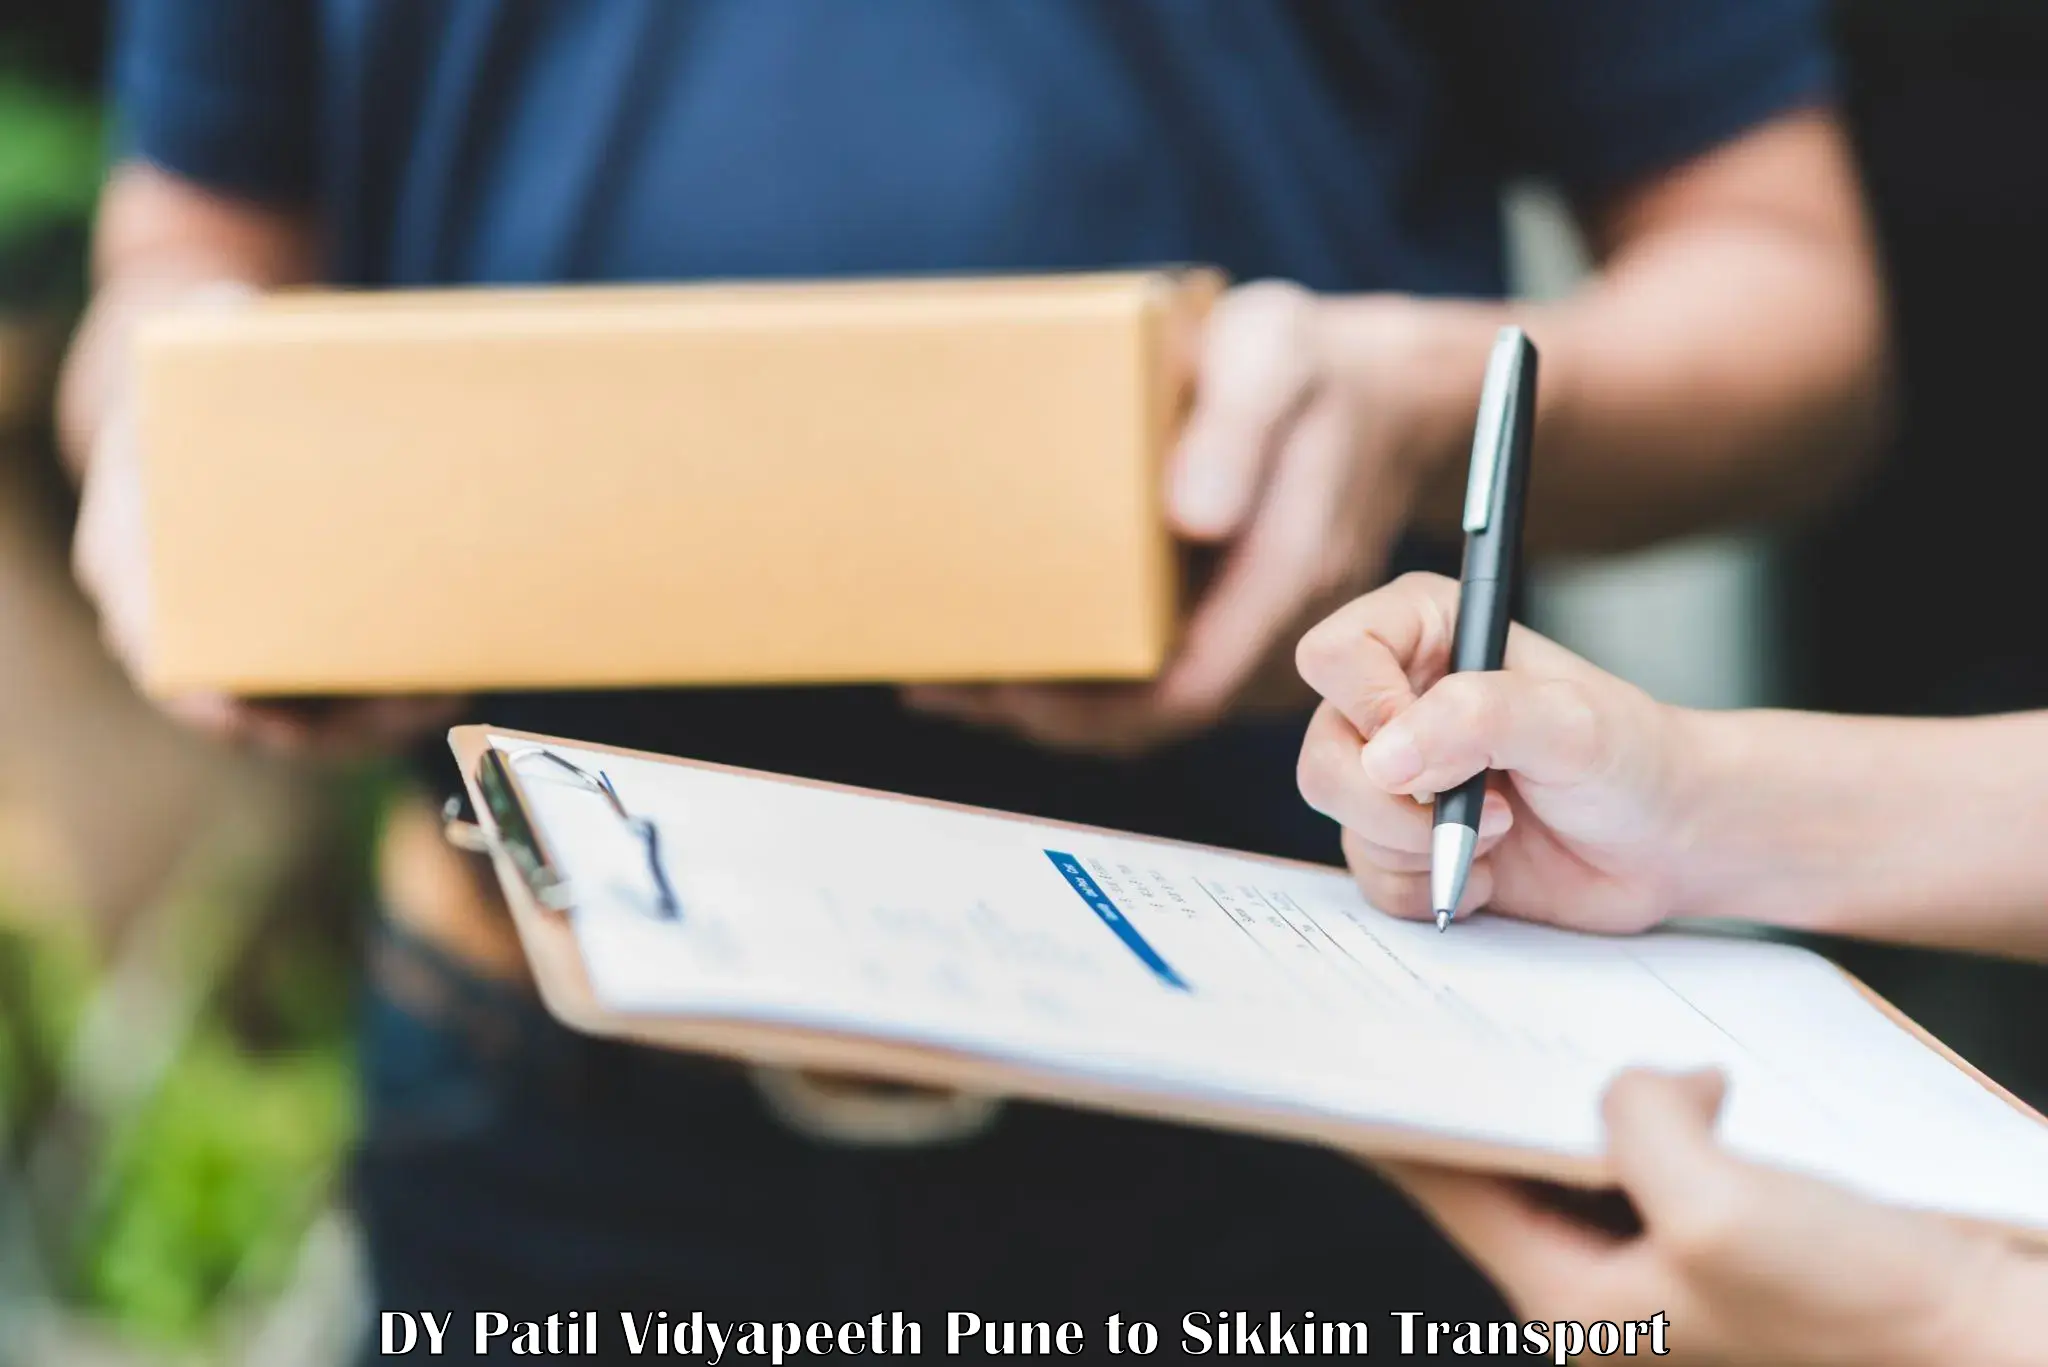 Delivery service DY Patil Vidyapeeth Pune to Singtam